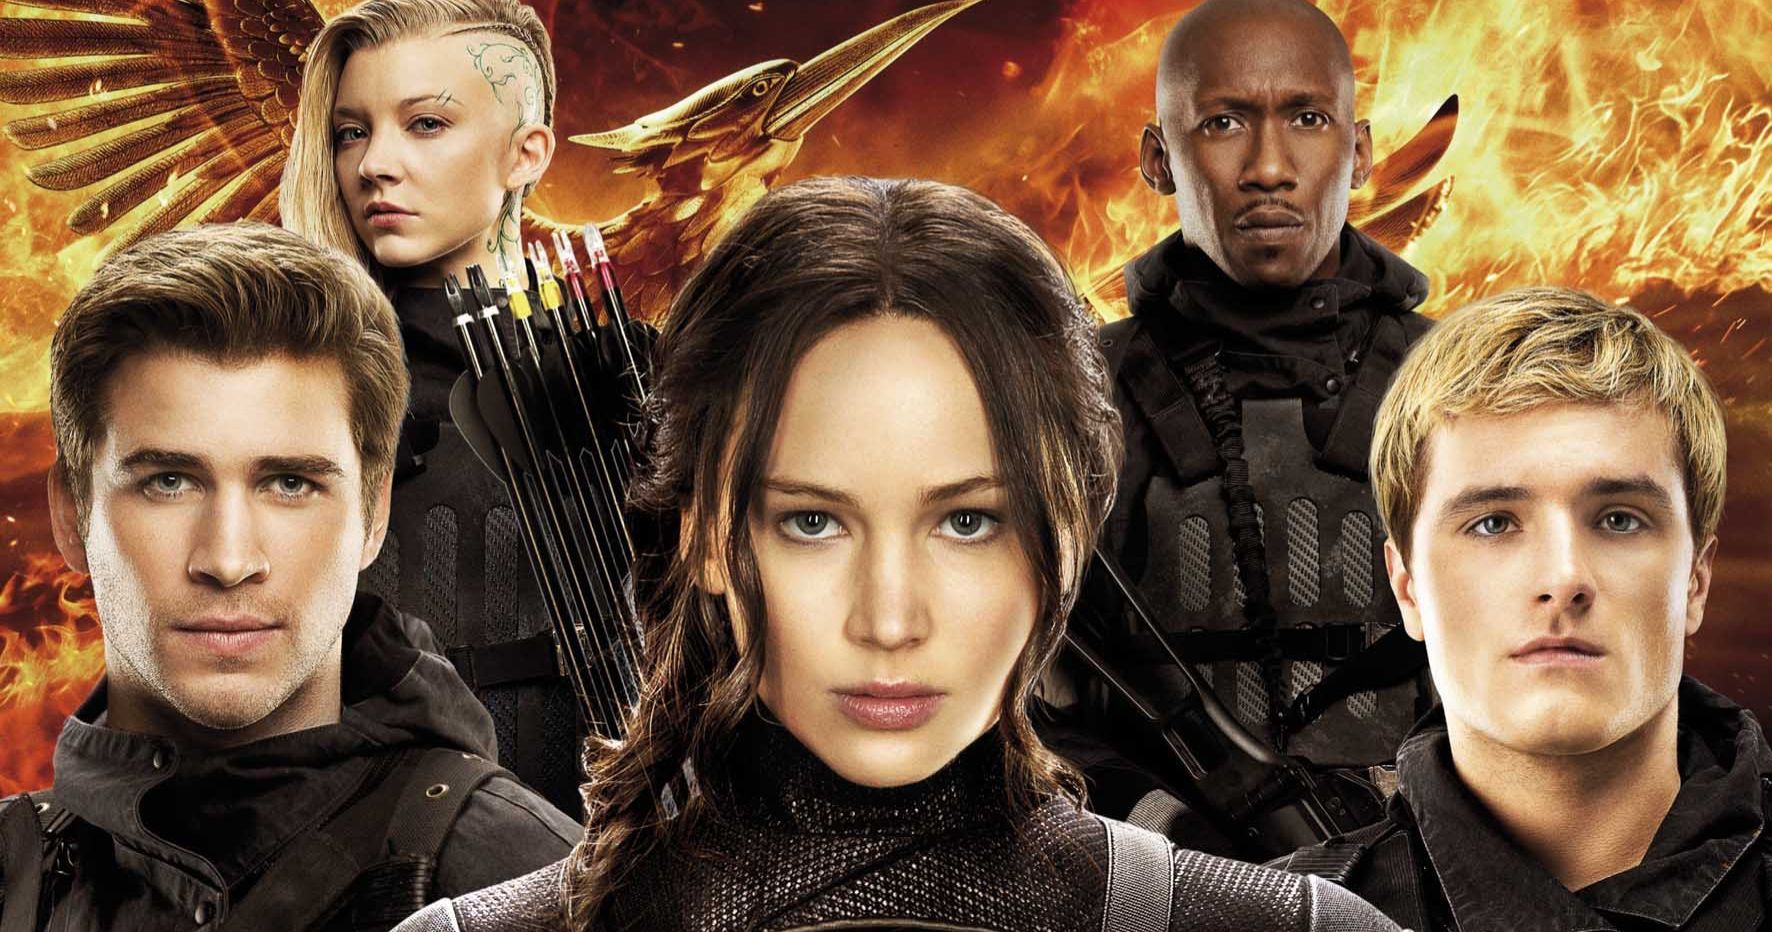 Hunger Games Prequel Movie Is Happening, Book Is Coming First in 2020